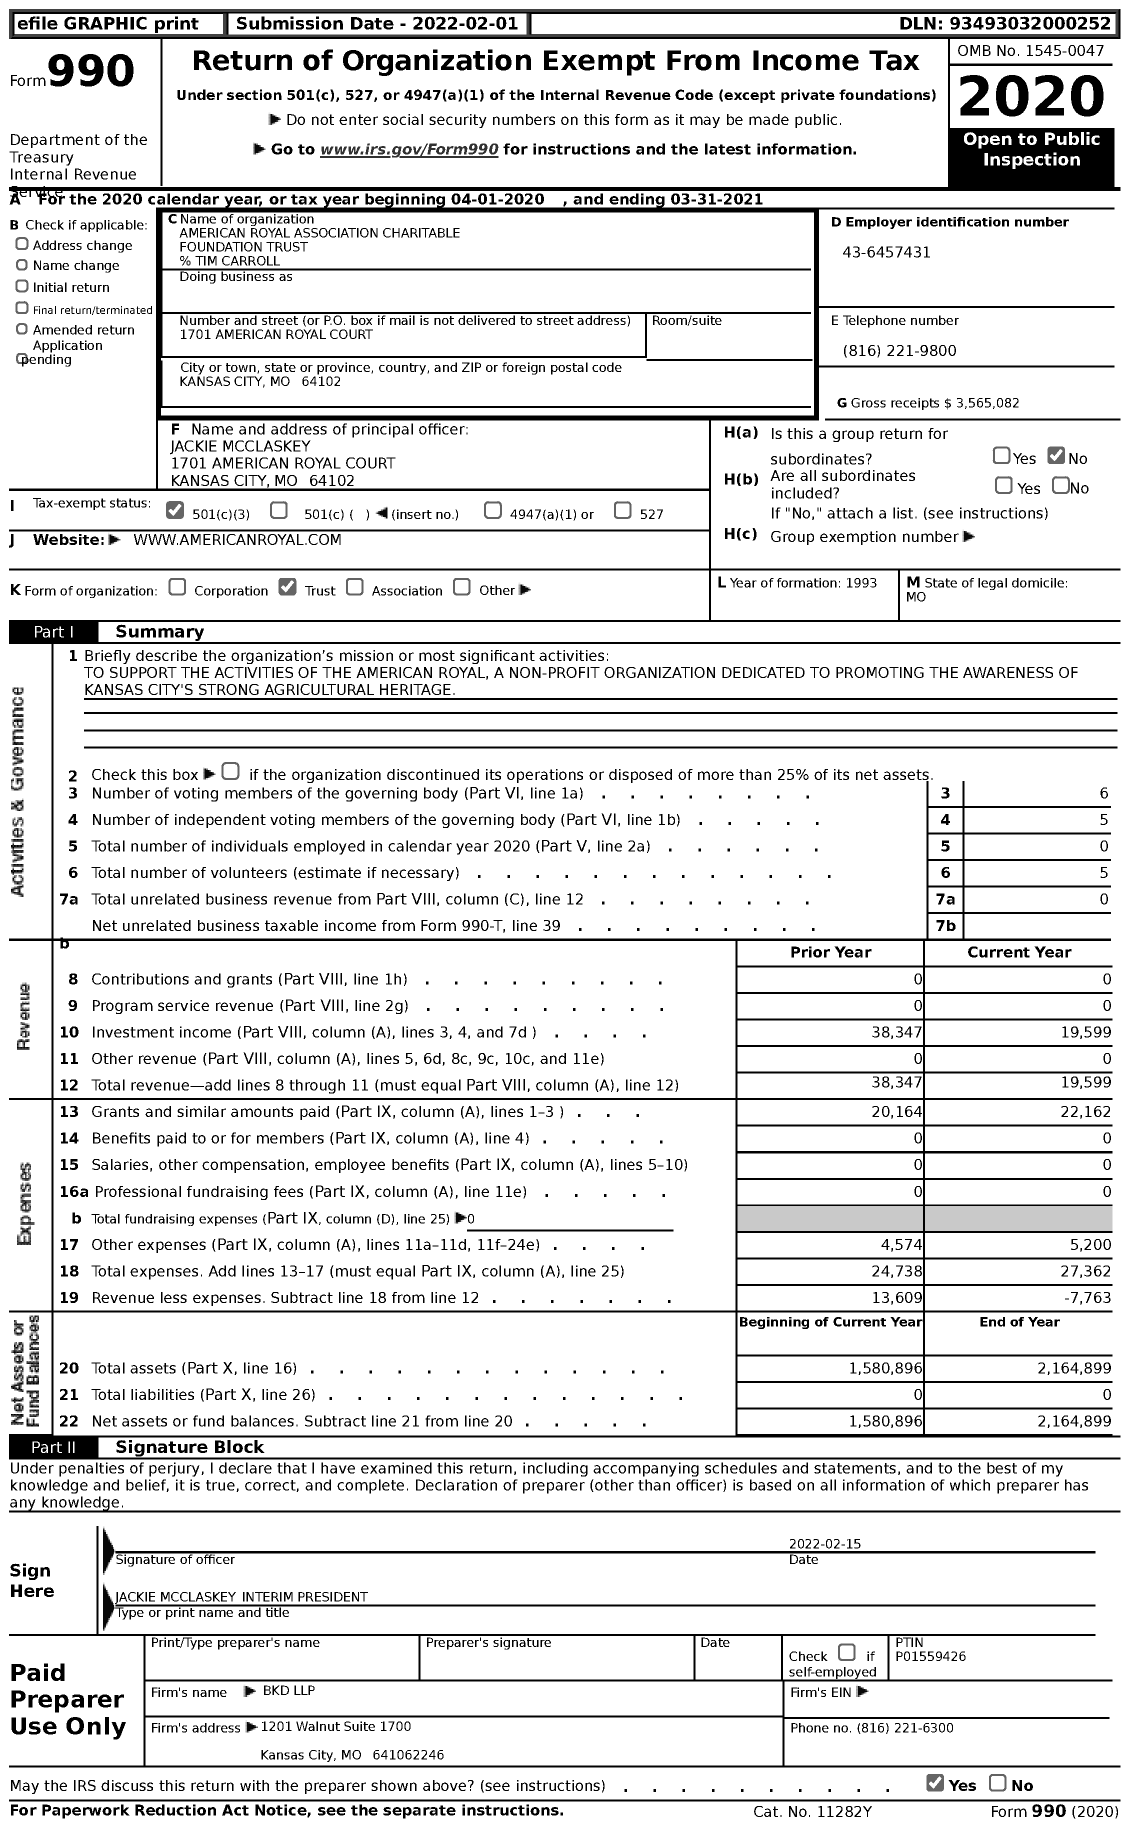 Image of first page of 2020 Form 990 for The American Royal Association Charitable Foundation Trust